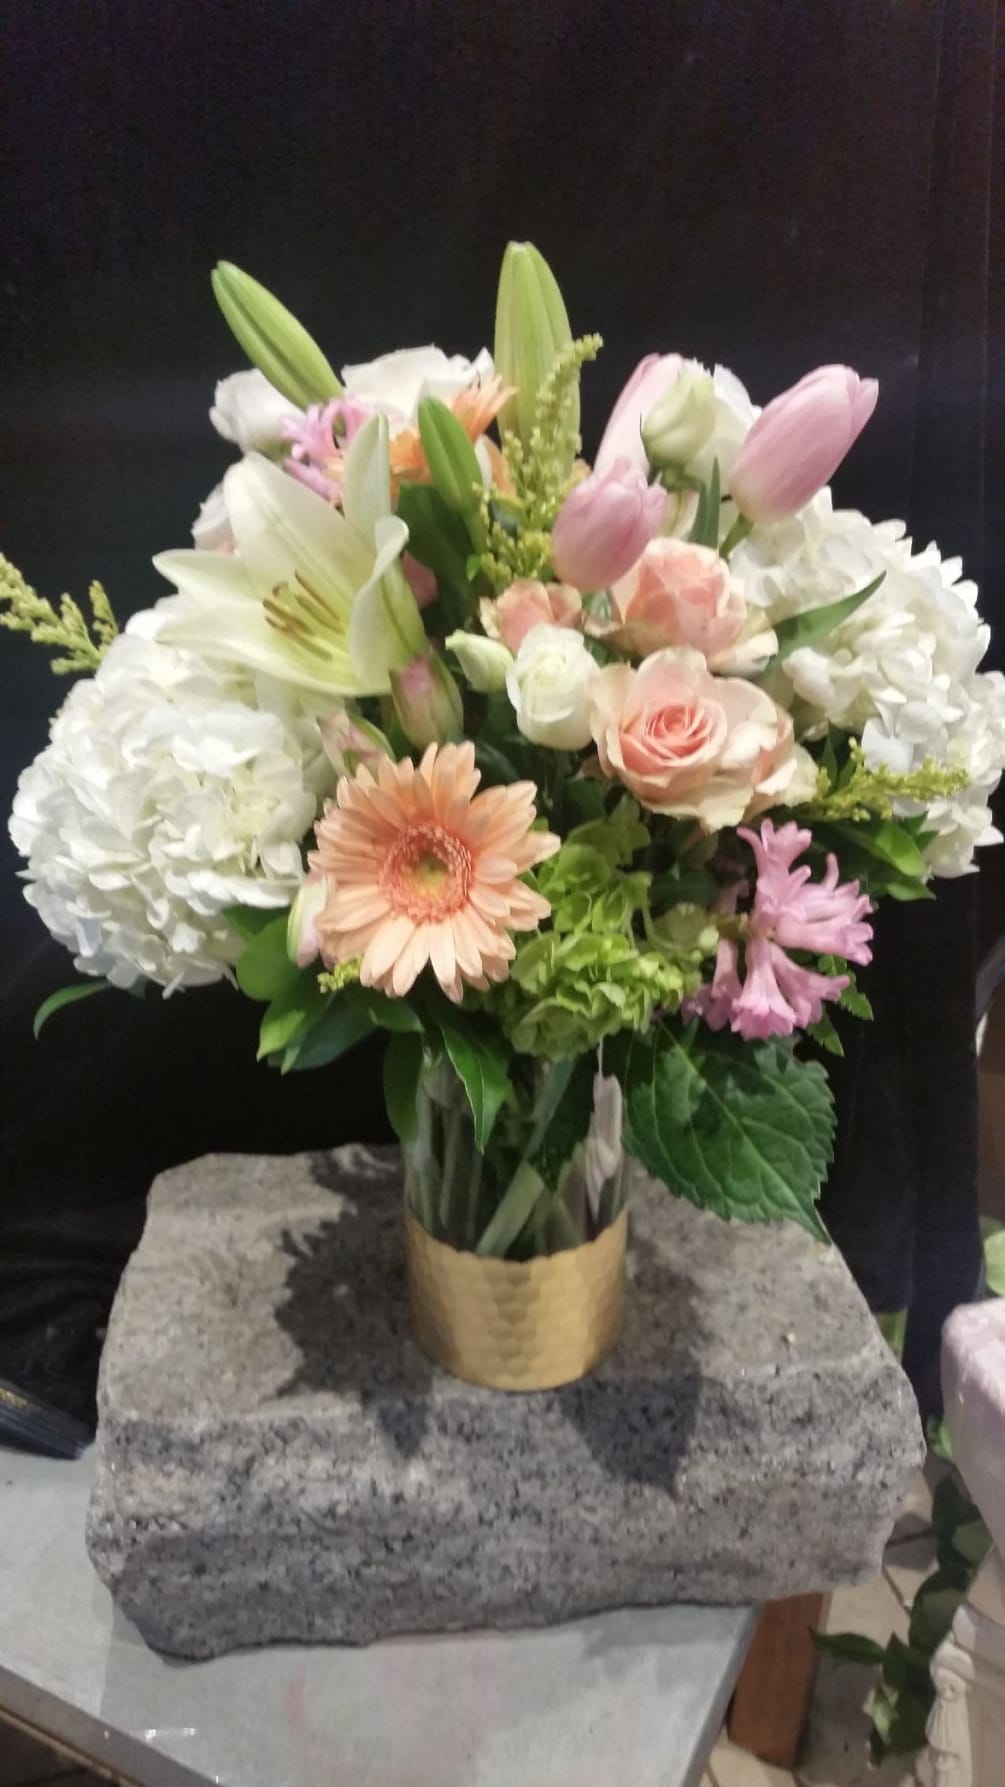 Our bestselling &#039;Cream Puff&#039; is a sweet, elegant gathering of premium blooms